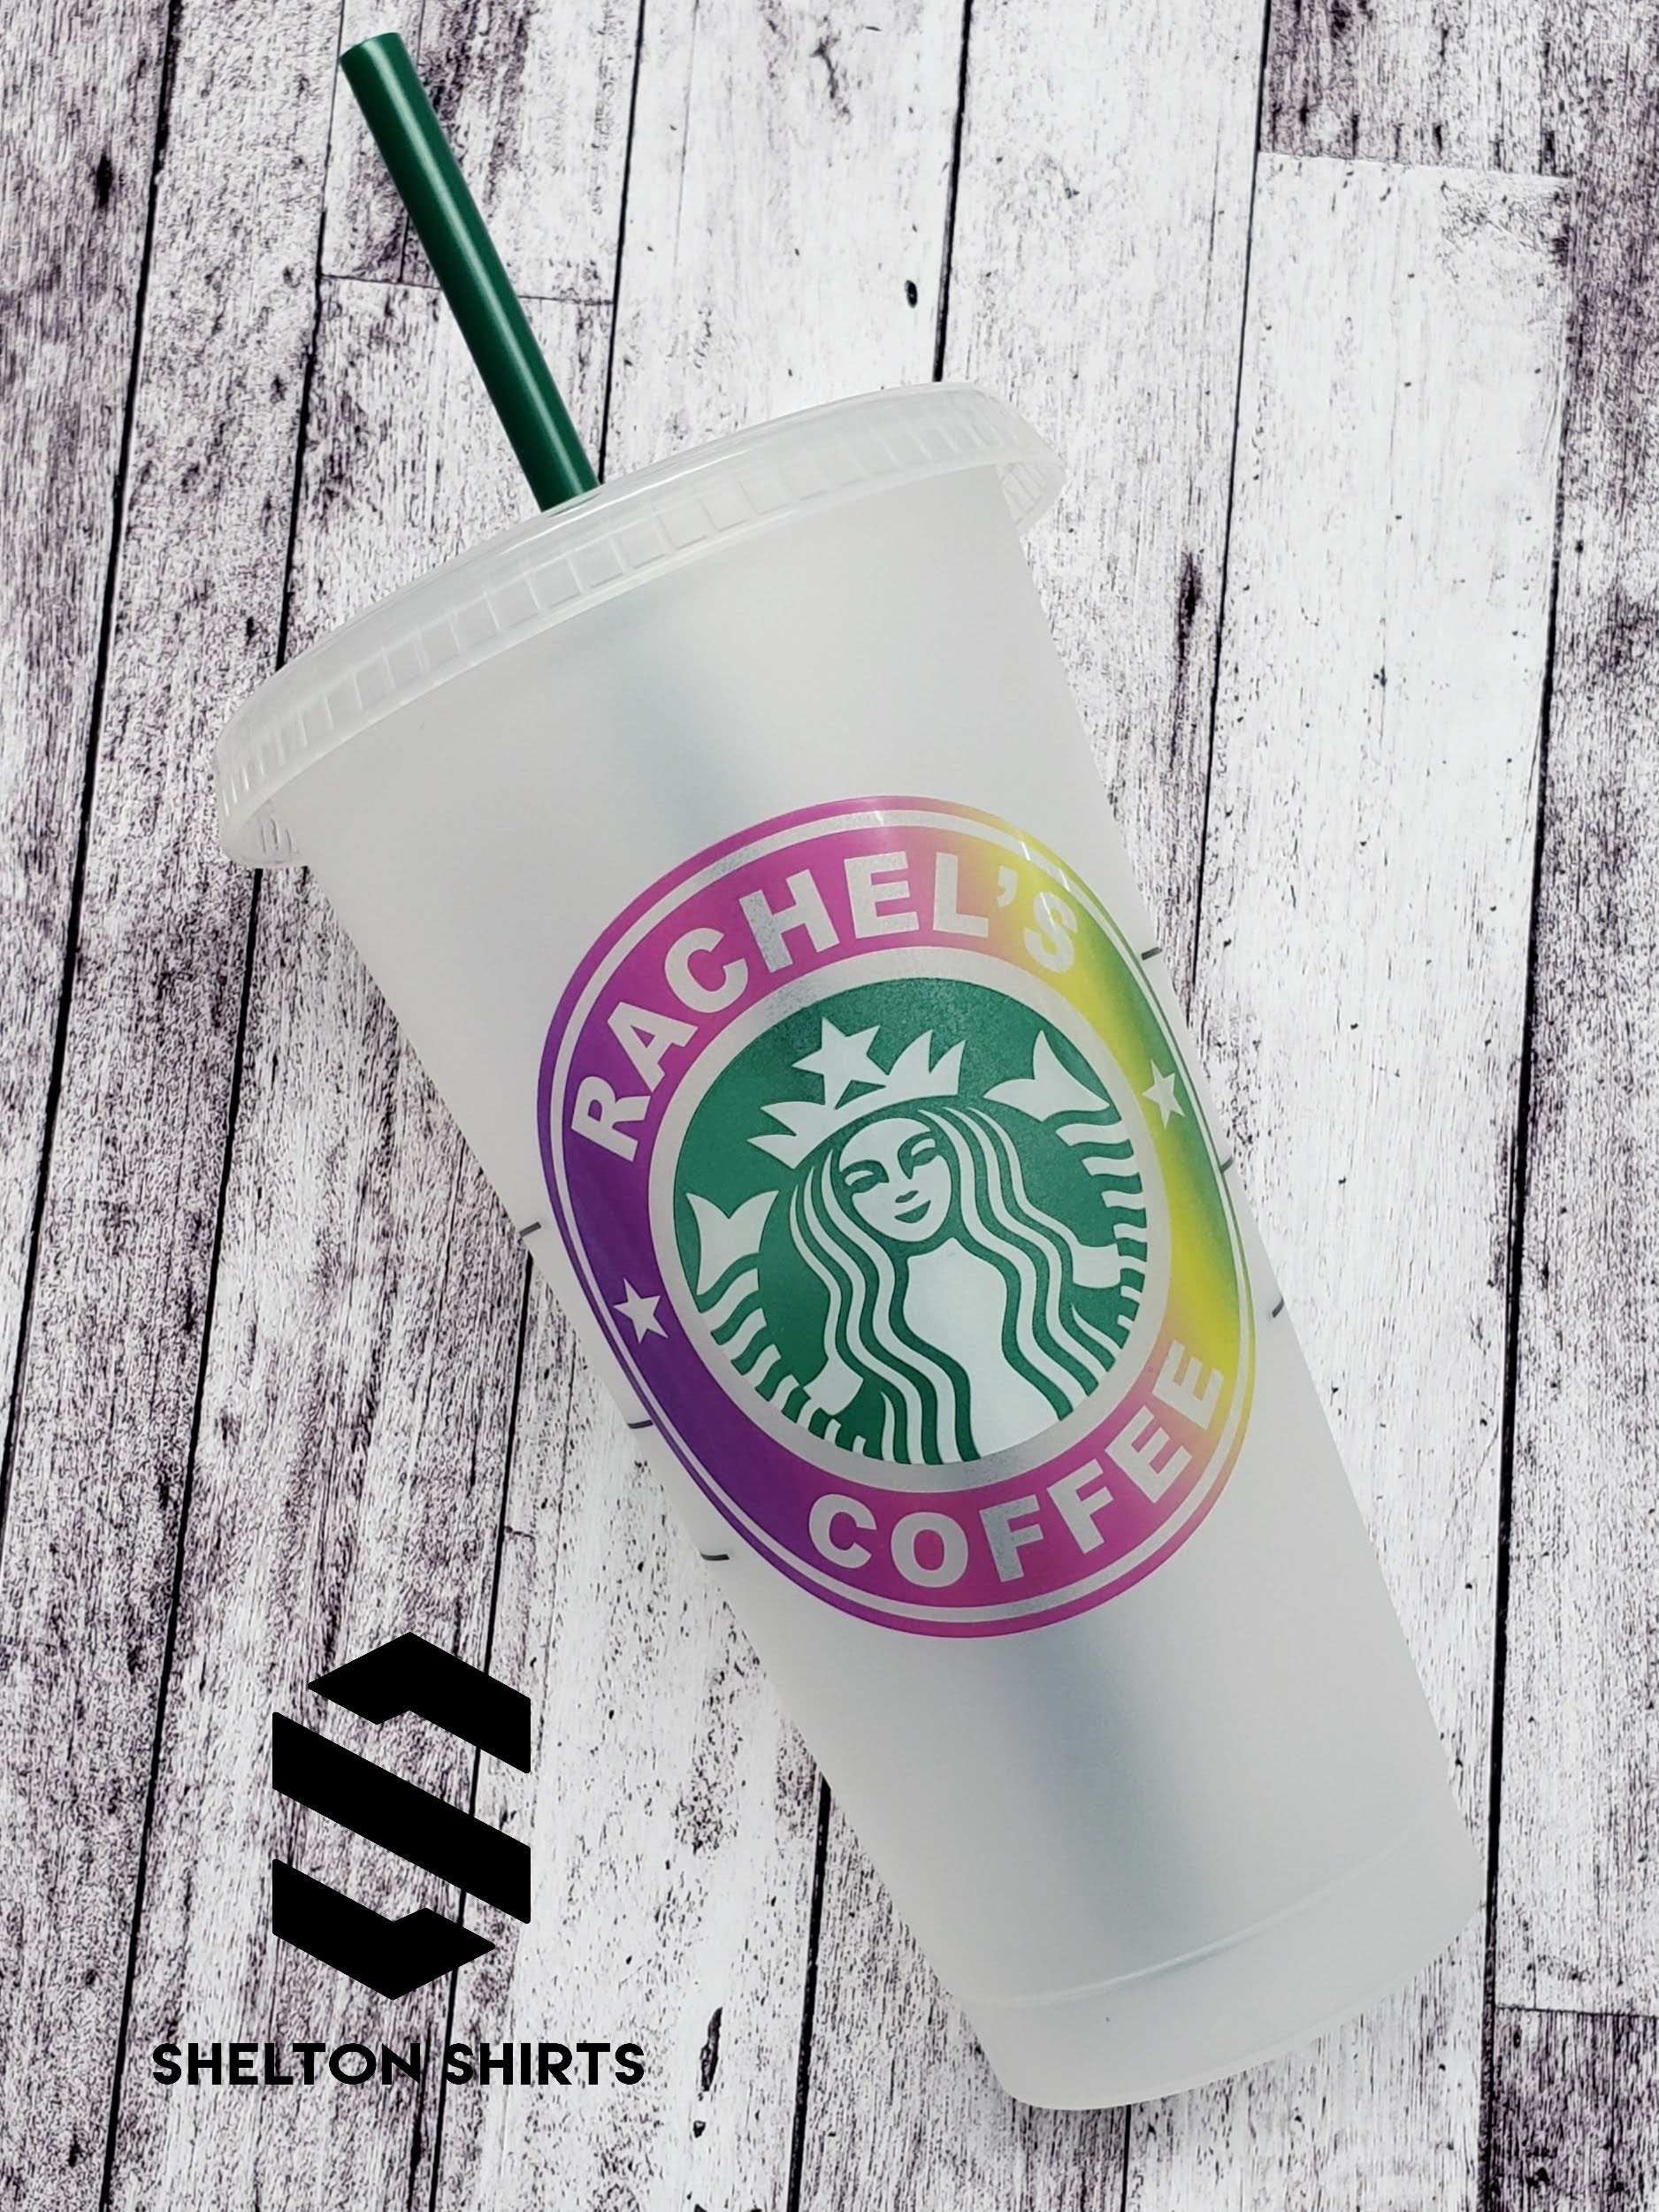 Starbucks Cold Cup | Personalized Starbucks Cup | Boho Rainbow Cup